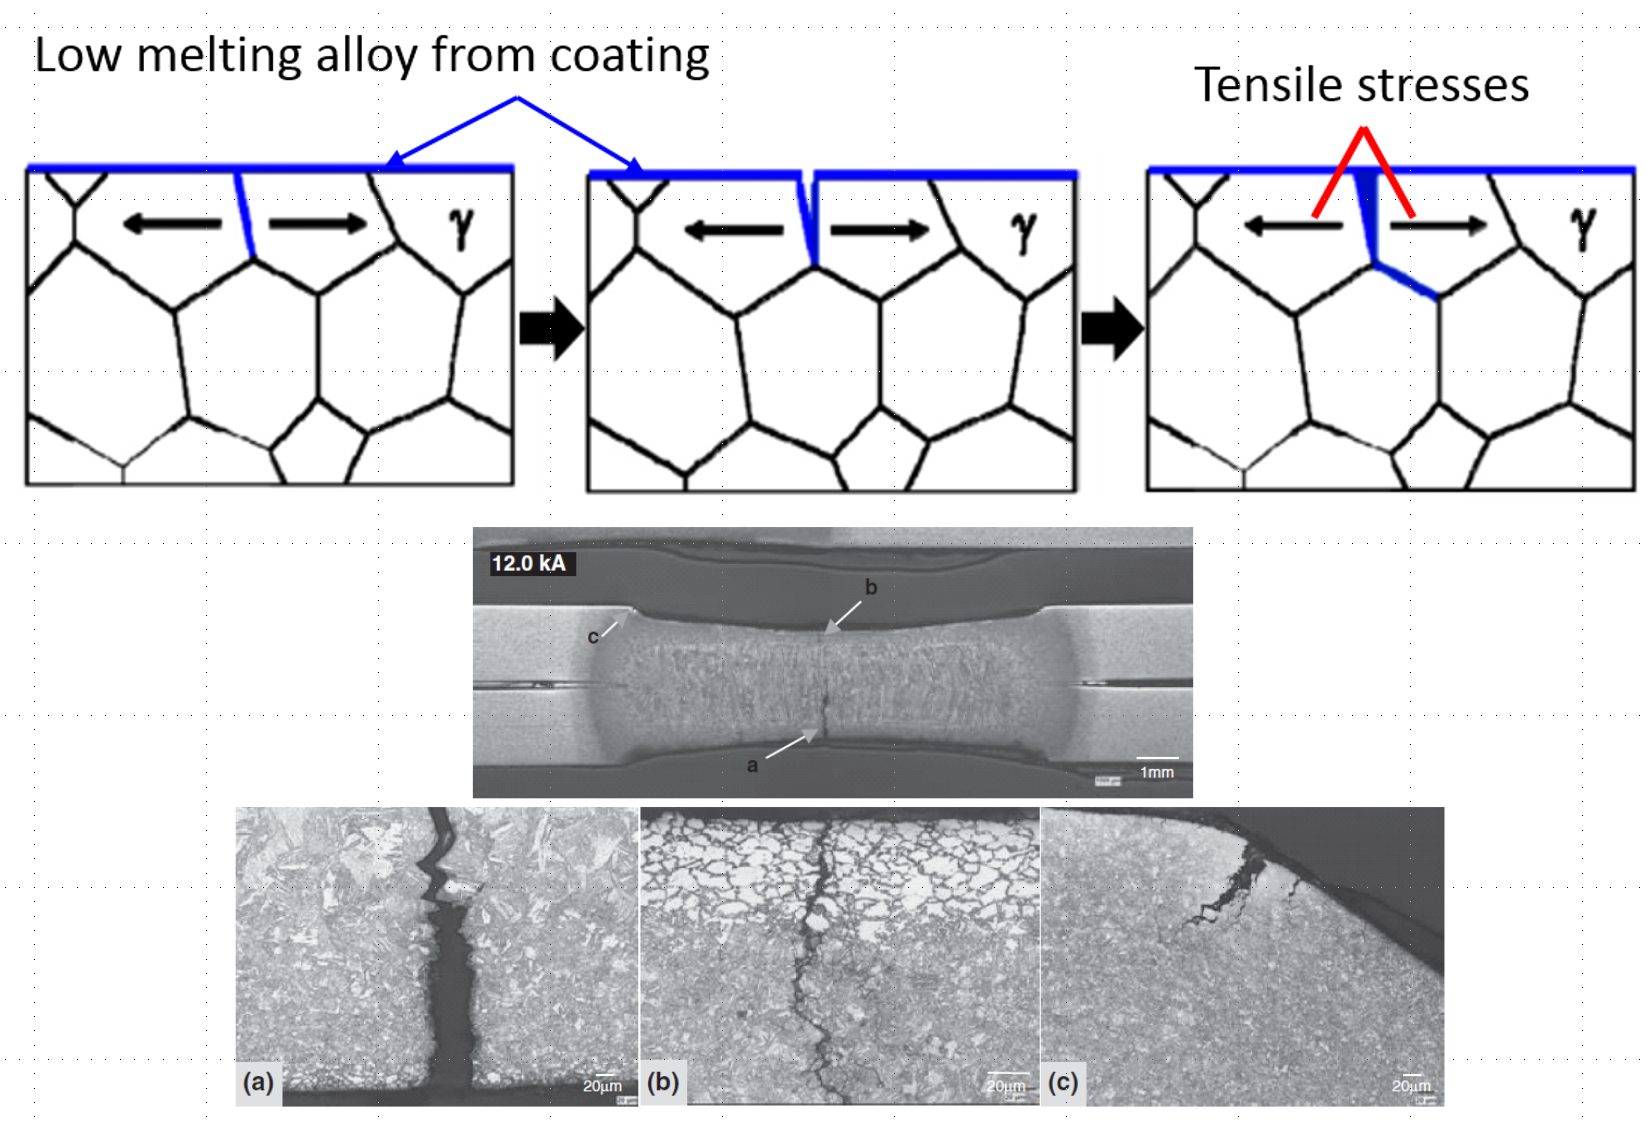 Figure 2: Description of (top image) and actual example (bottom) of the LME phenomenon in zinc coated AHSS.